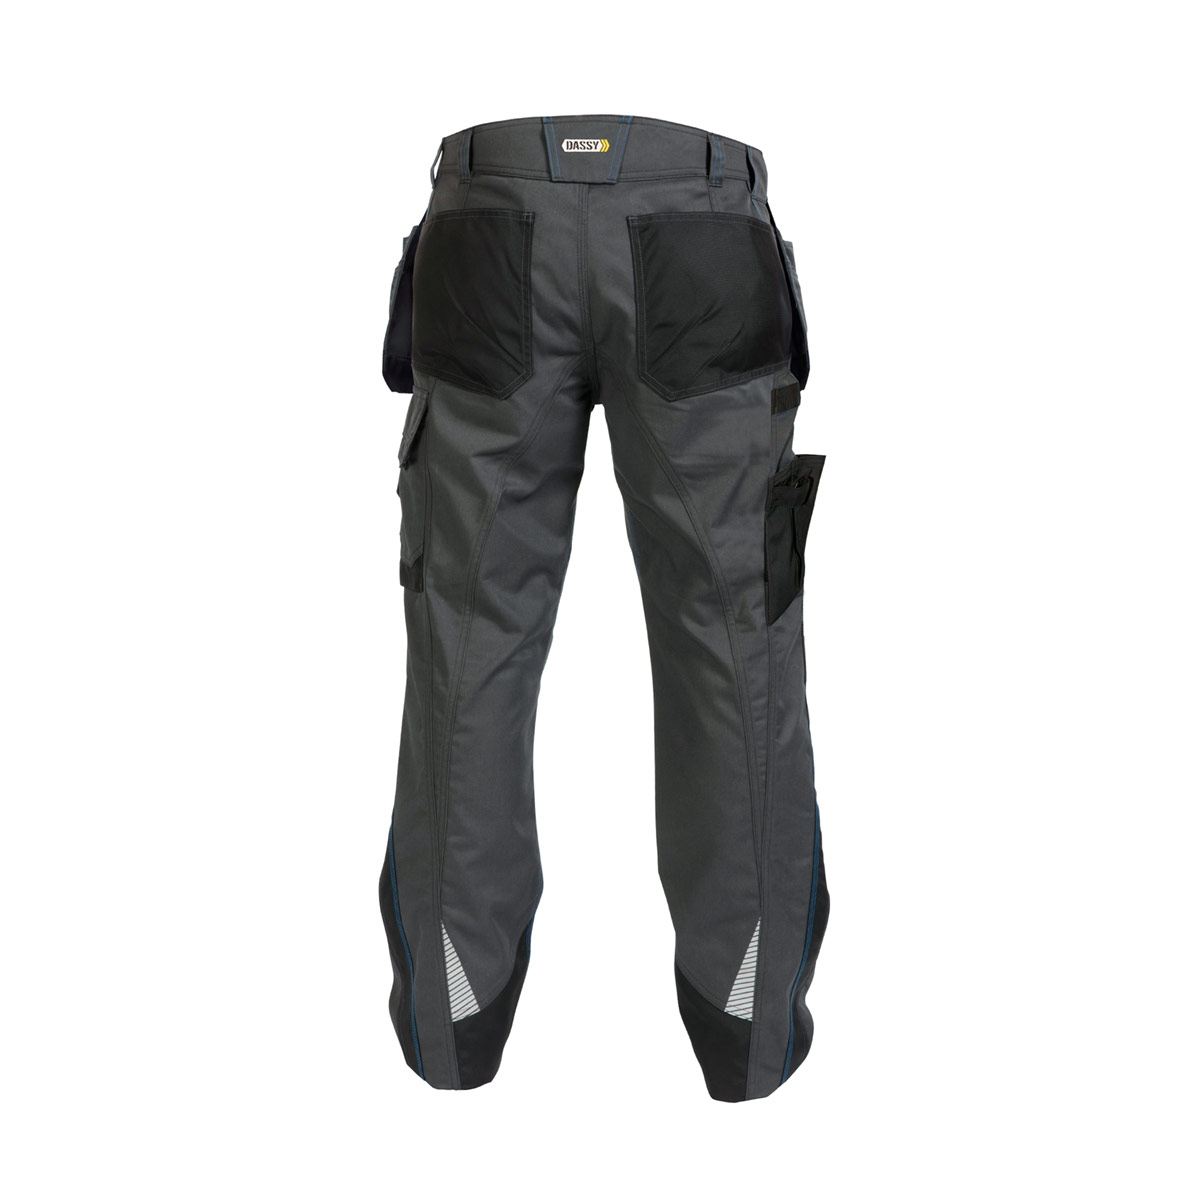 DASSY Magnetic work trousers with holster pockets and knee pad pockets